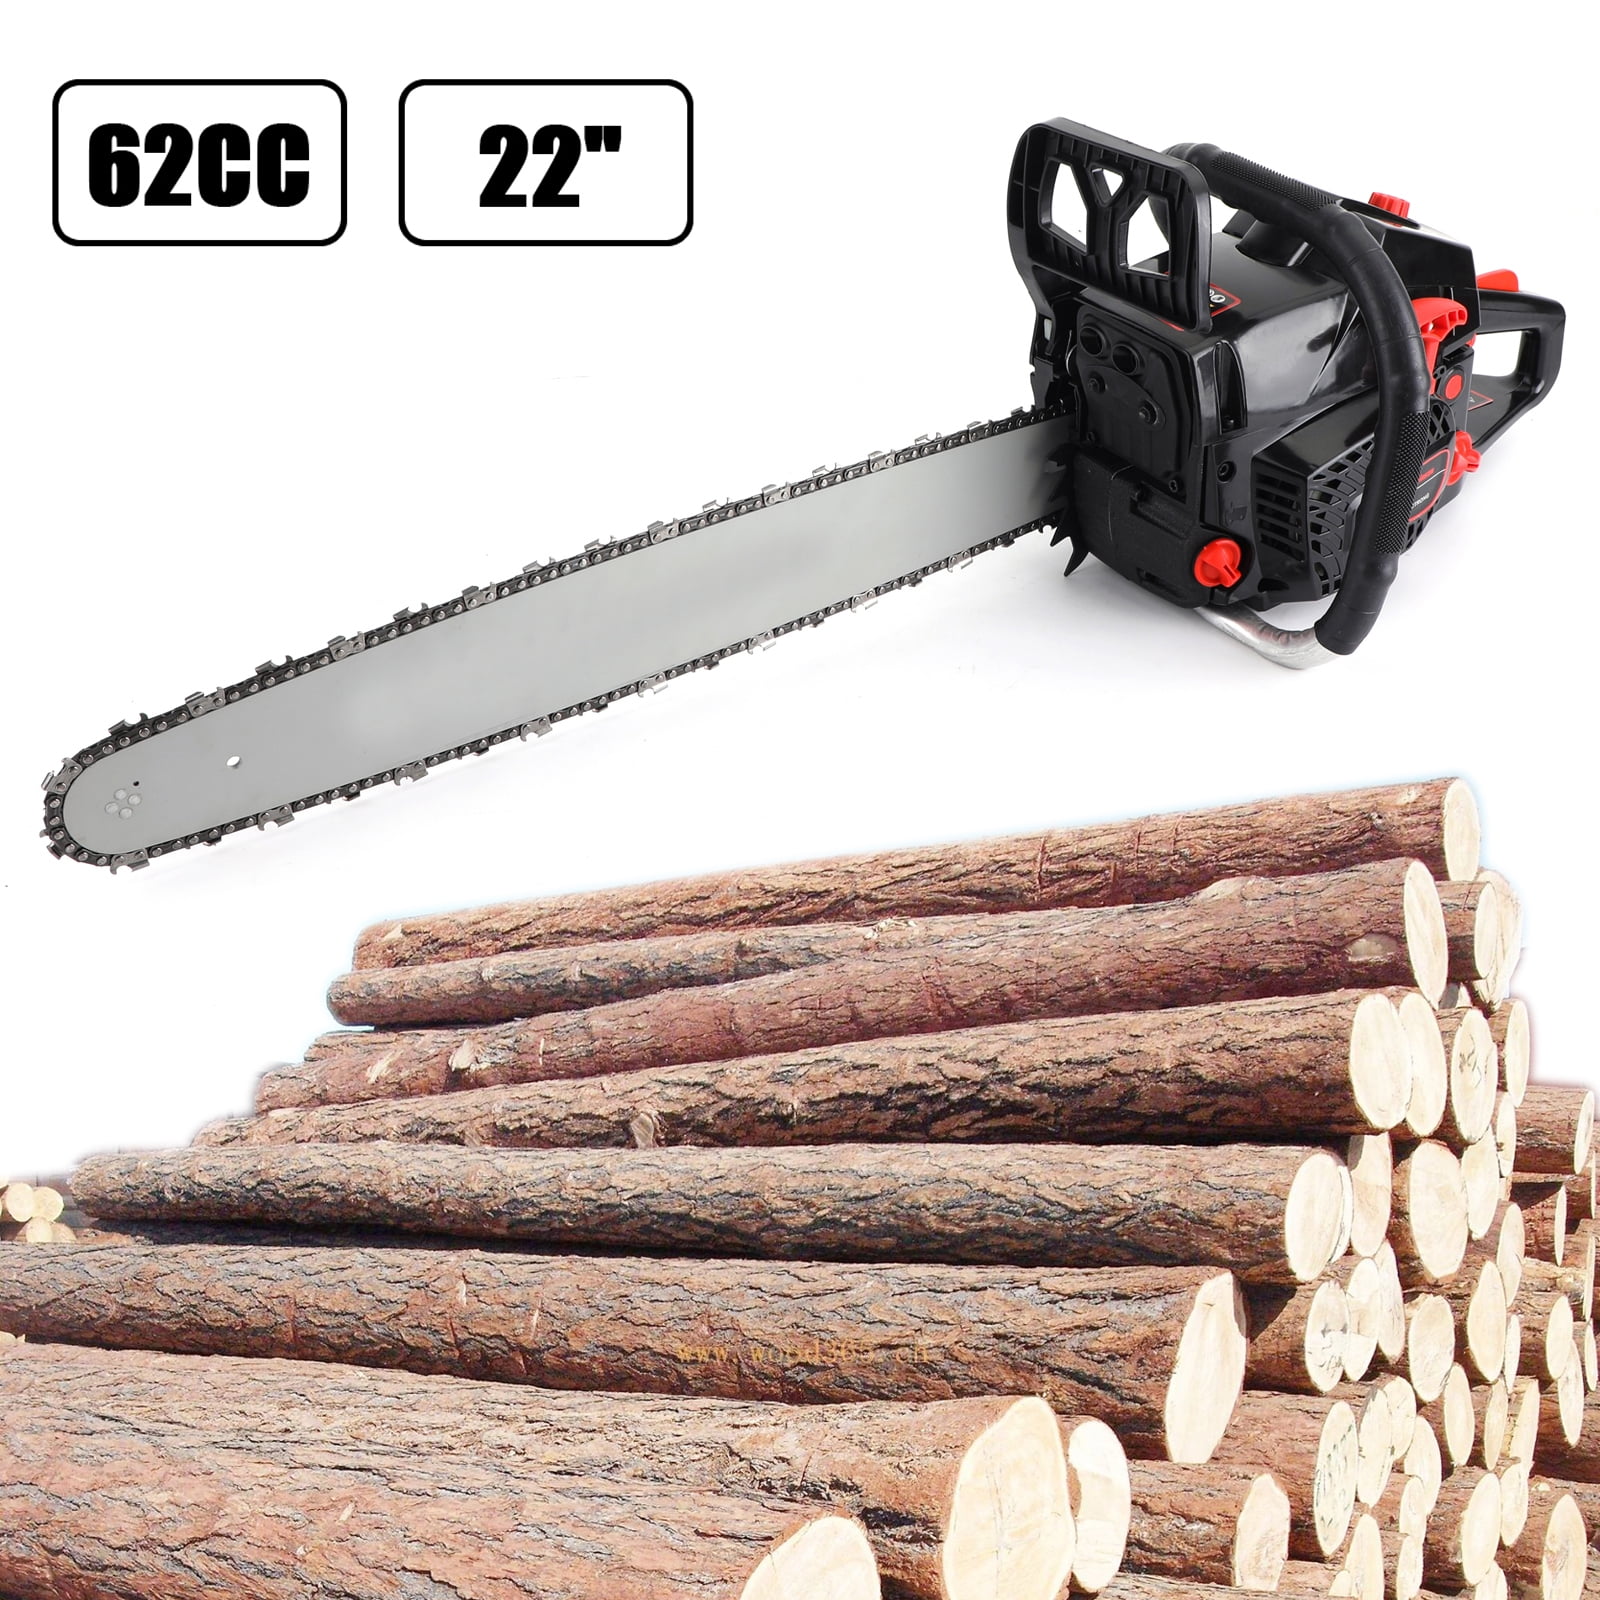 Details about   COOCHEER 62CC 20" Gas Chainsaw 2 Stroke Handed Petrol Chain Woodcutting 4 B e 22 